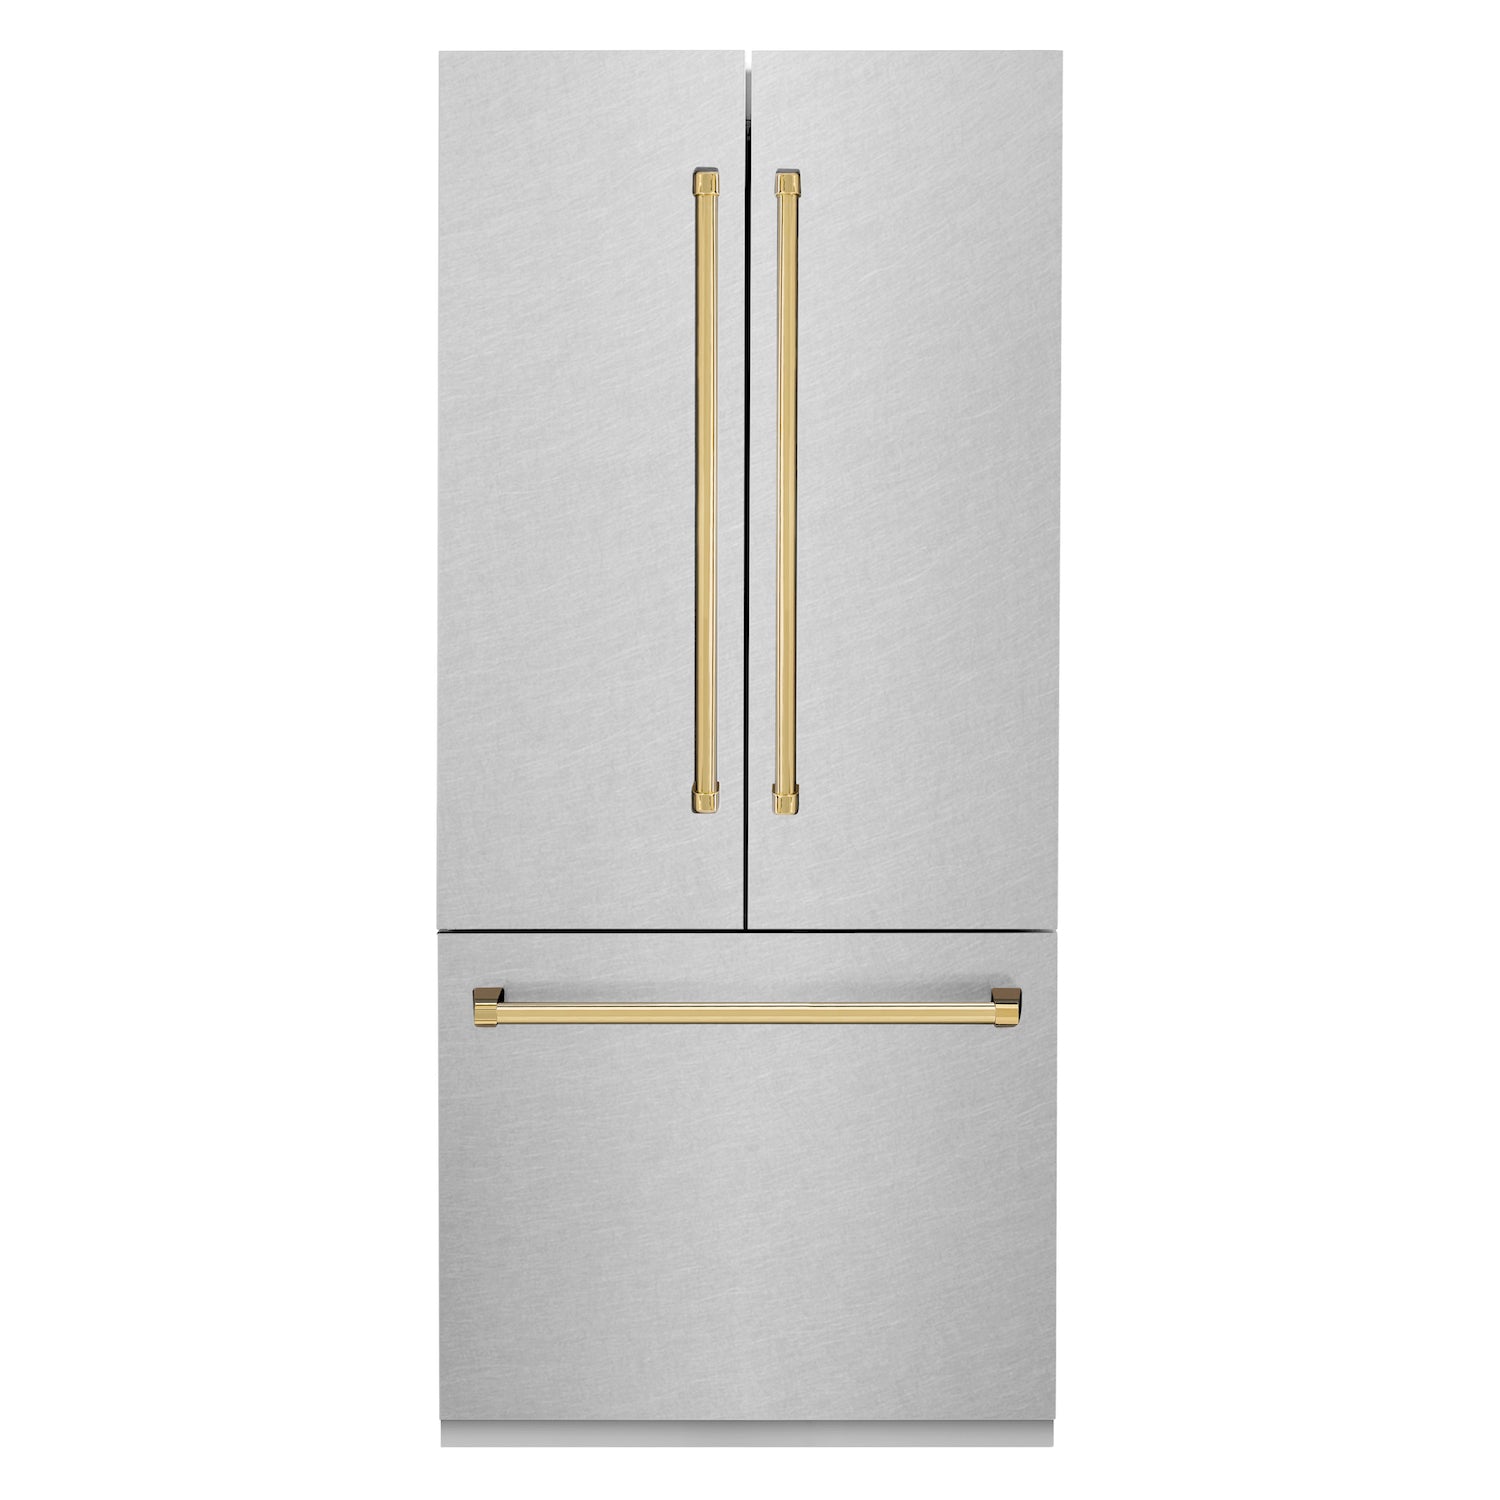 ZLINE Autograph Edition 36 in. 19.6 cu. ft. Built-in 2-Door Bottom Freezer Refrigerator with Internal Water and Ice Dispenser in Fingerprint Resistant Stainless Steel with Polished Gold Accents (RBIVZ-SN-36-G) front, closed.